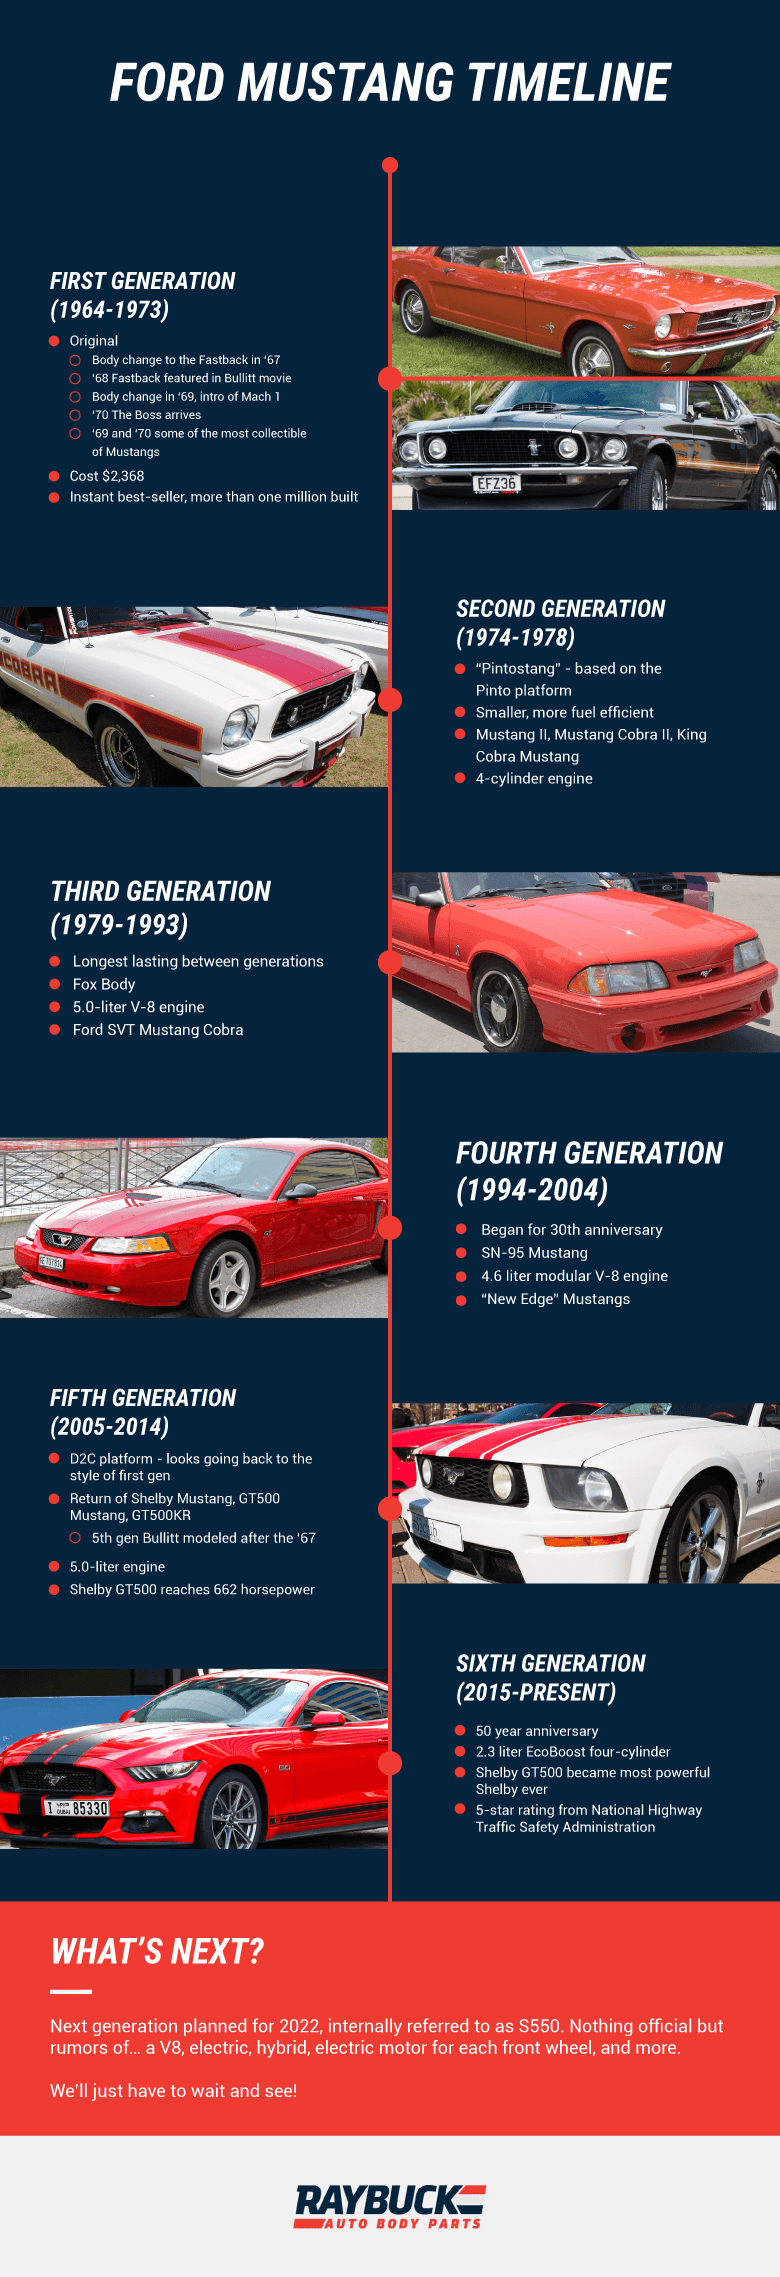 Ford Mustang Timeline